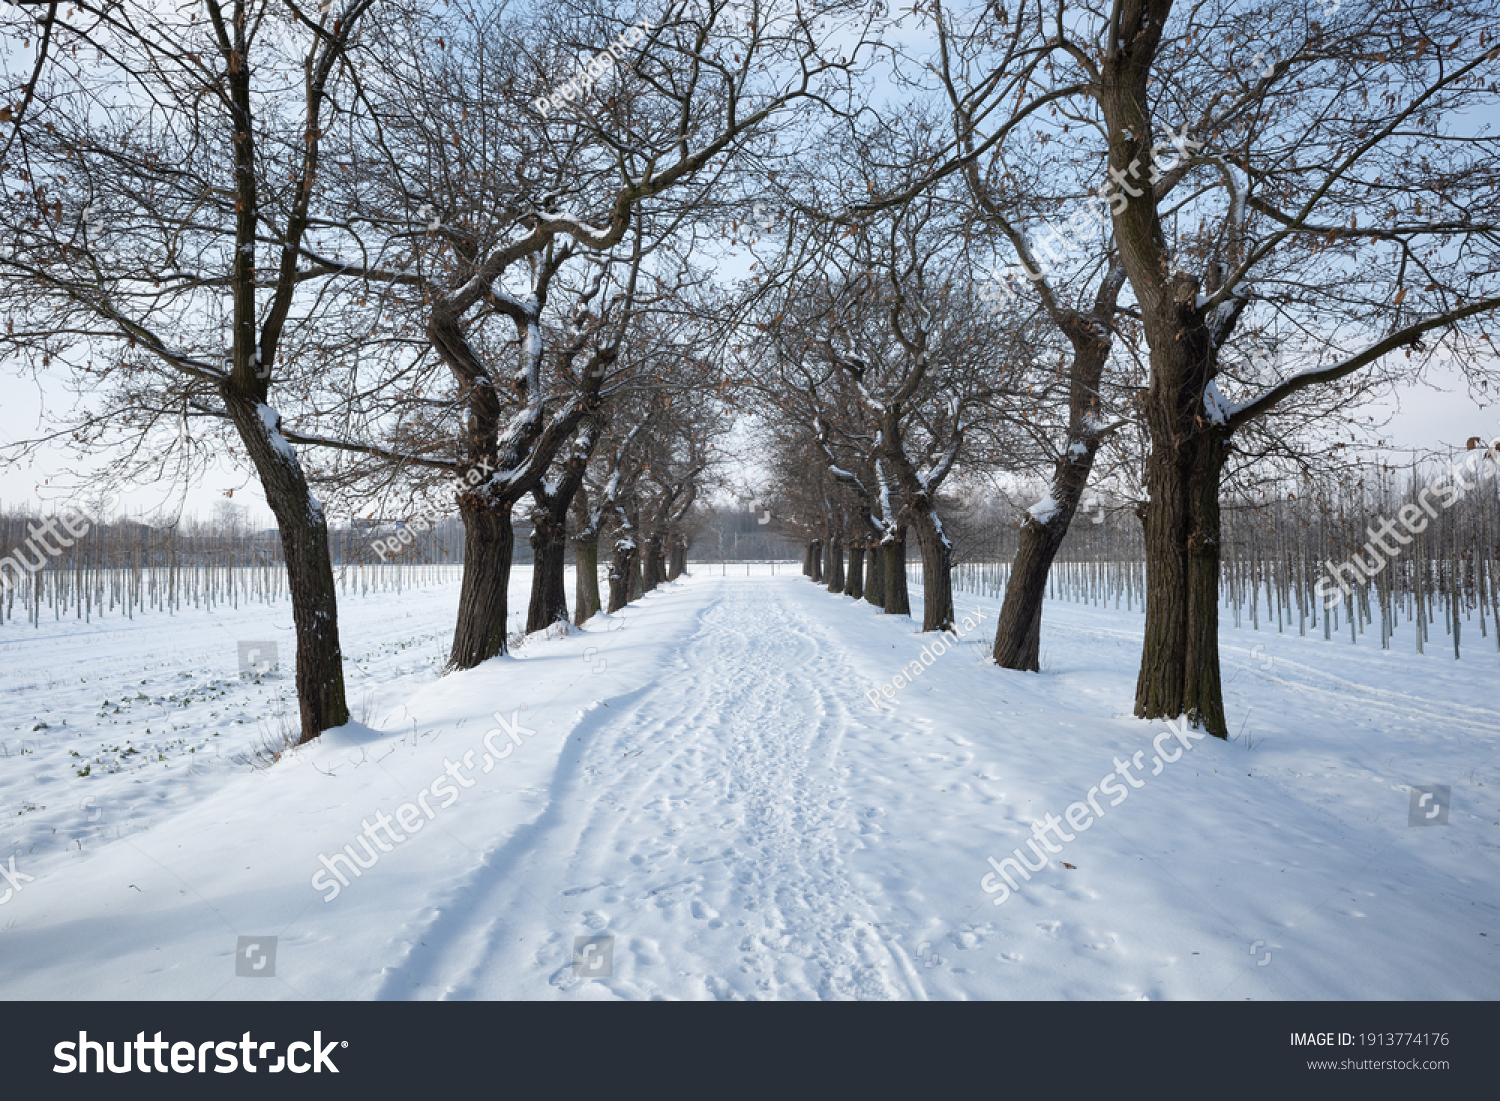 Outdoor diminish perspective view of empty street beside row of trees  and agriculture field covered by snow in winter season and sunny sky. #1913774176